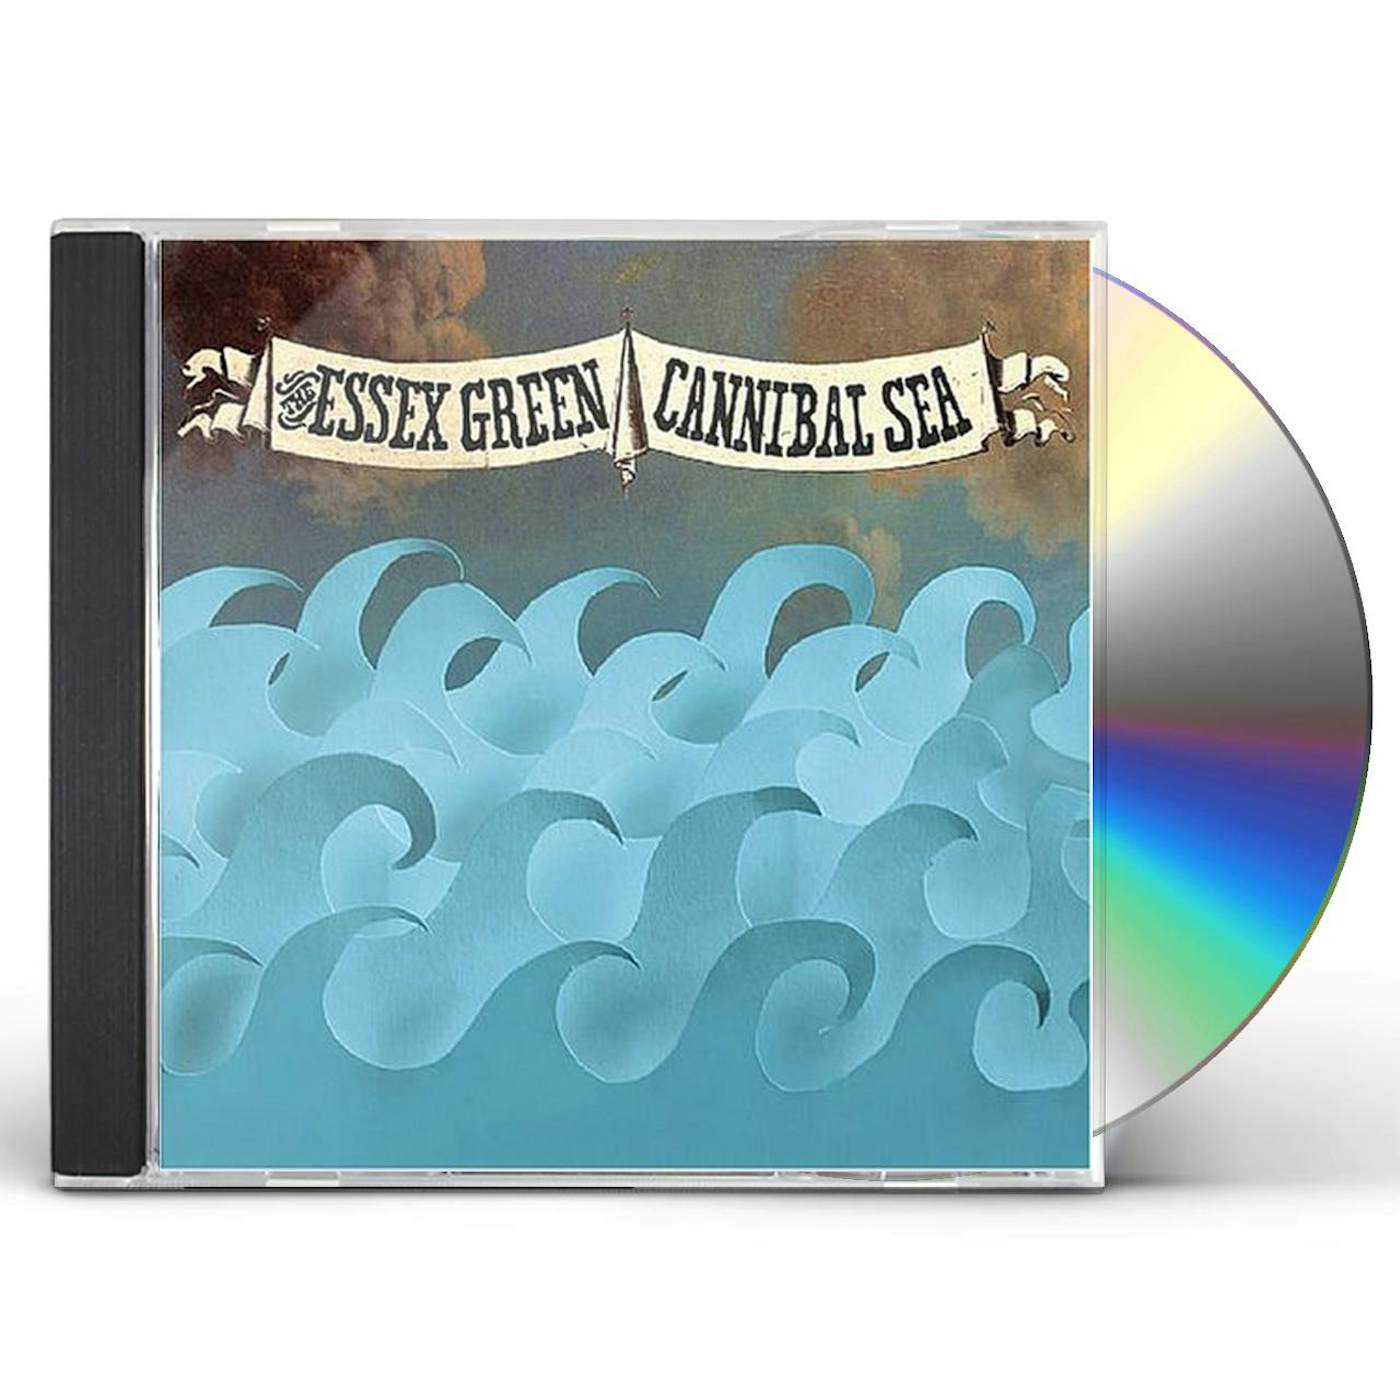 The Essex Green CANNIBAL SEA CD